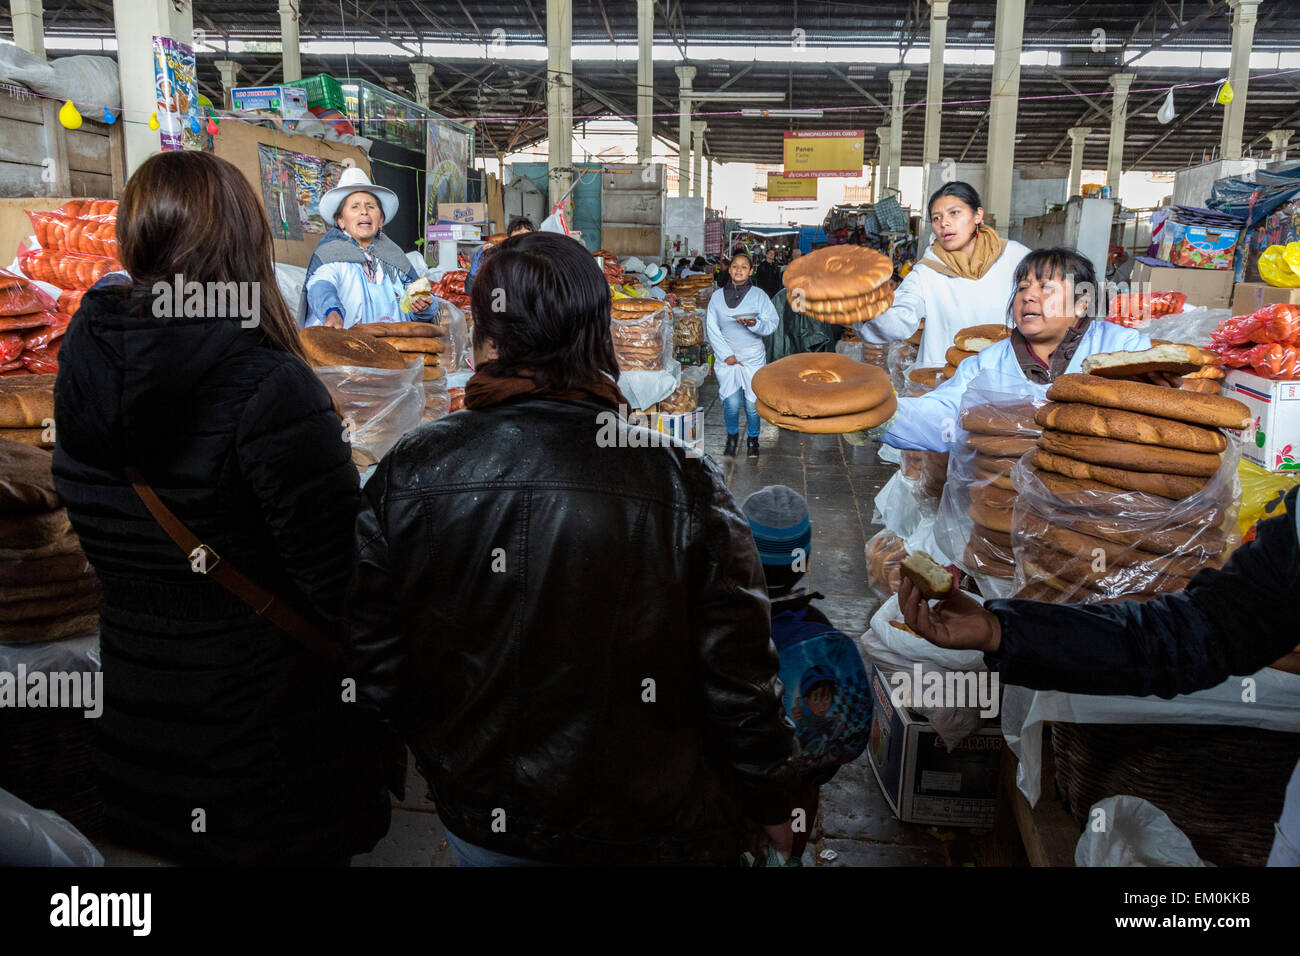 Peru, Cusco, San Pedro Market.  Women Selling Bread Clamoring for Attention of Potential Buyers. Stock Photo